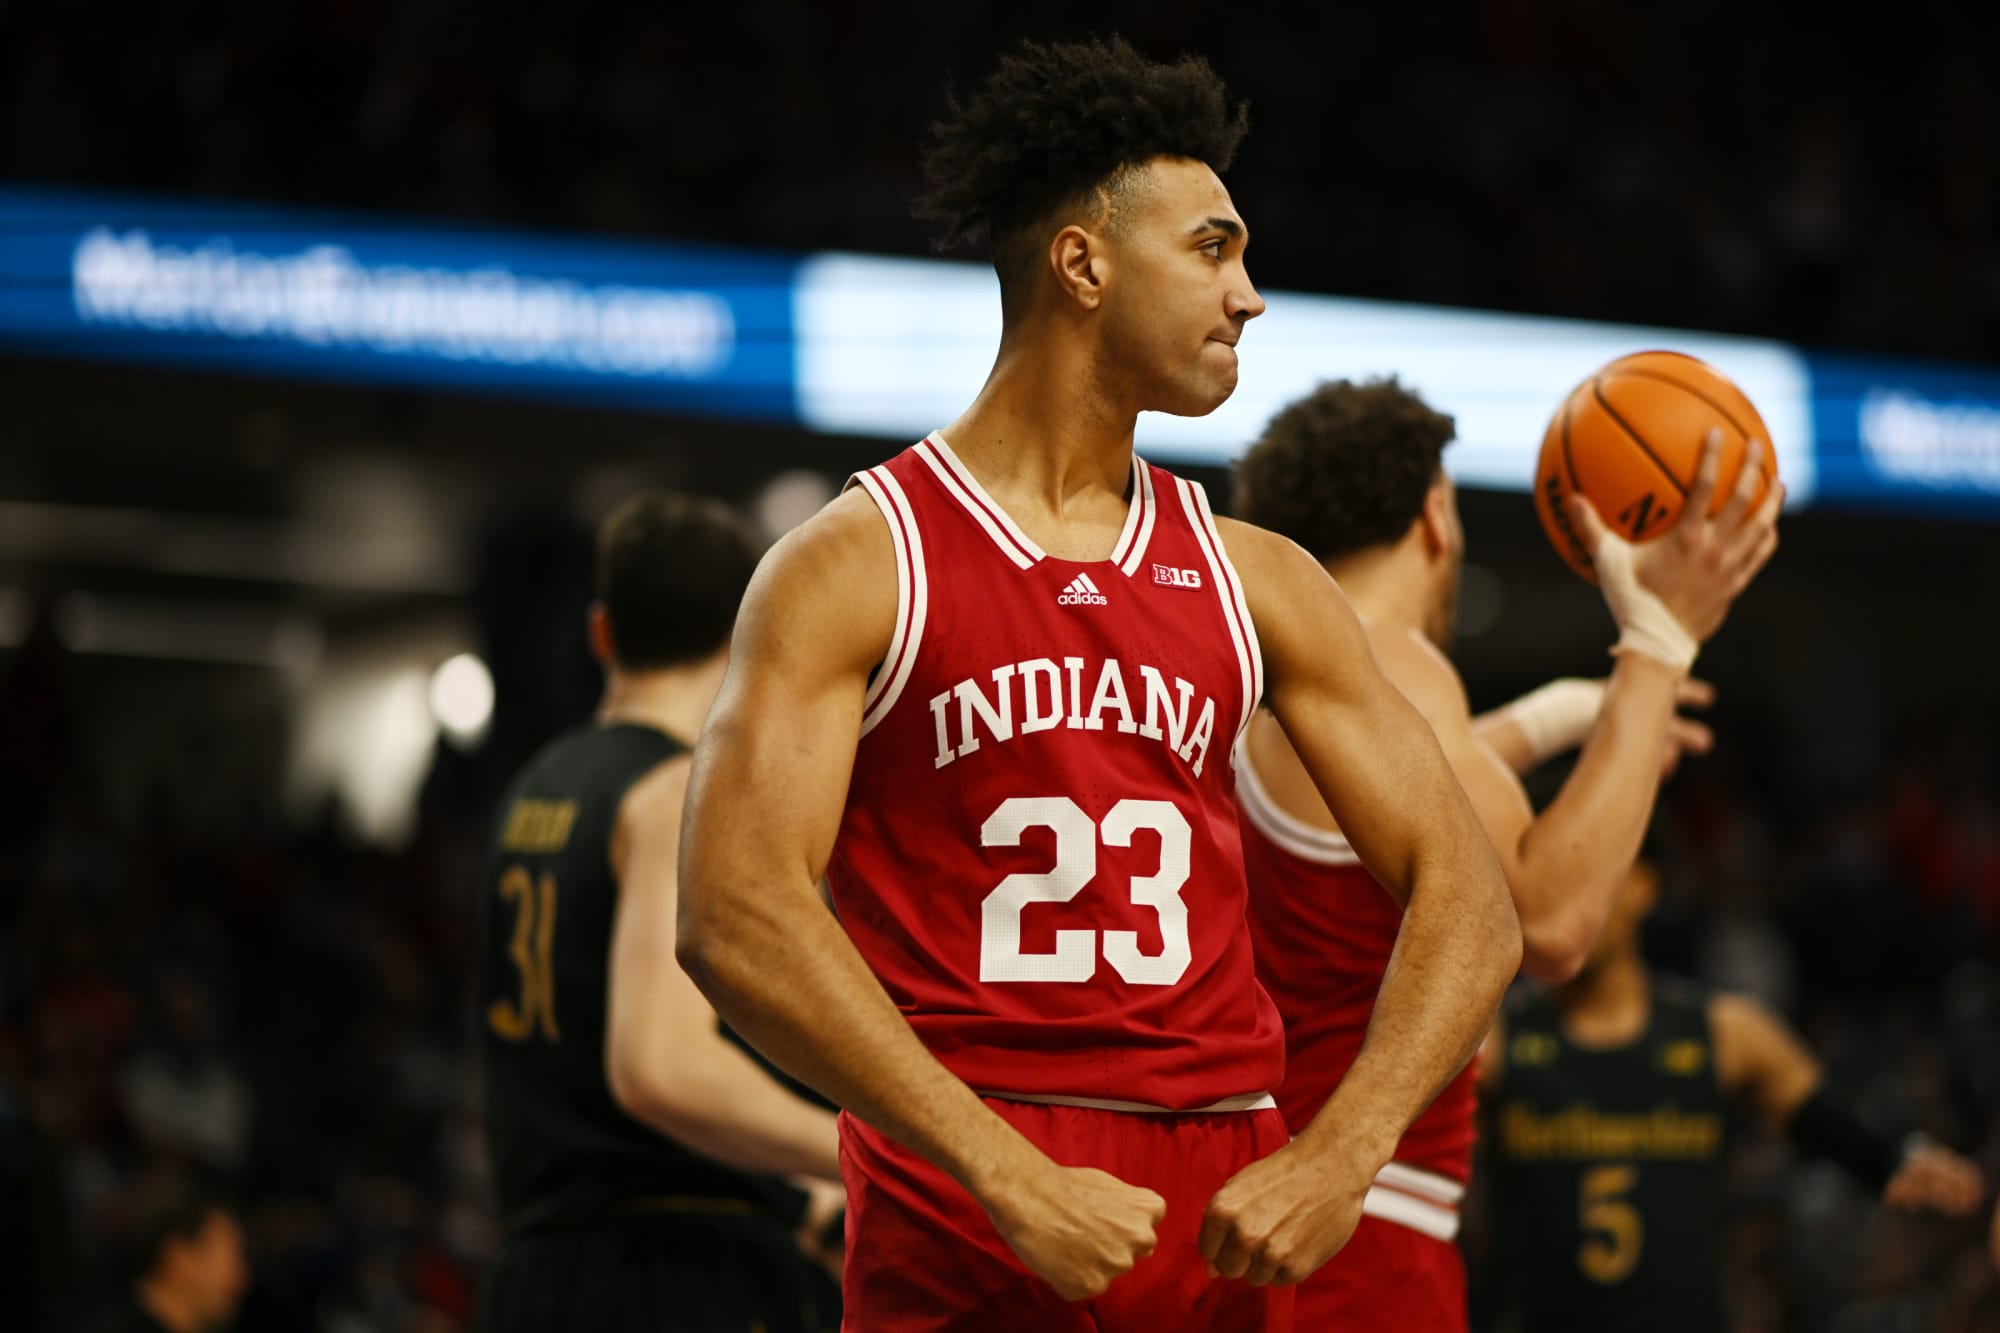 Indiana basketball: Hoosiers hold 4-seed in latest ESPN bracketology update